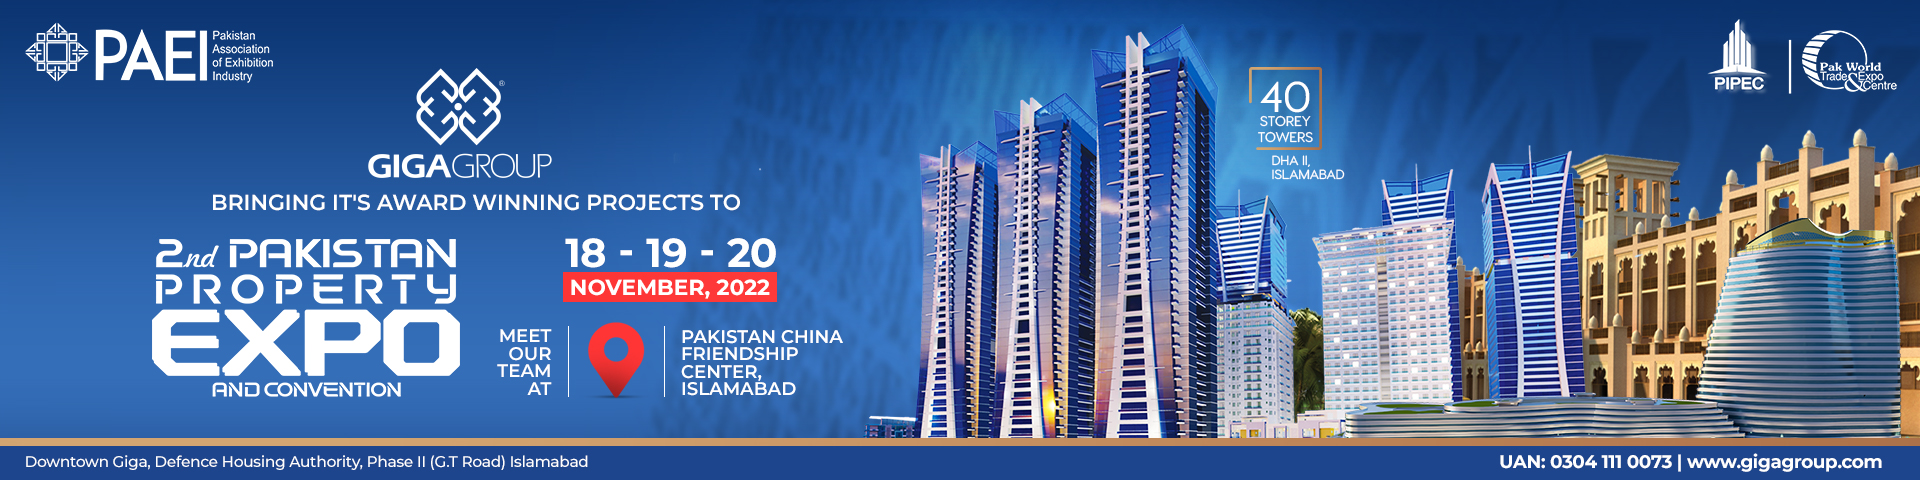 Giga Group at Pakistan Property Expo & Convention 2022